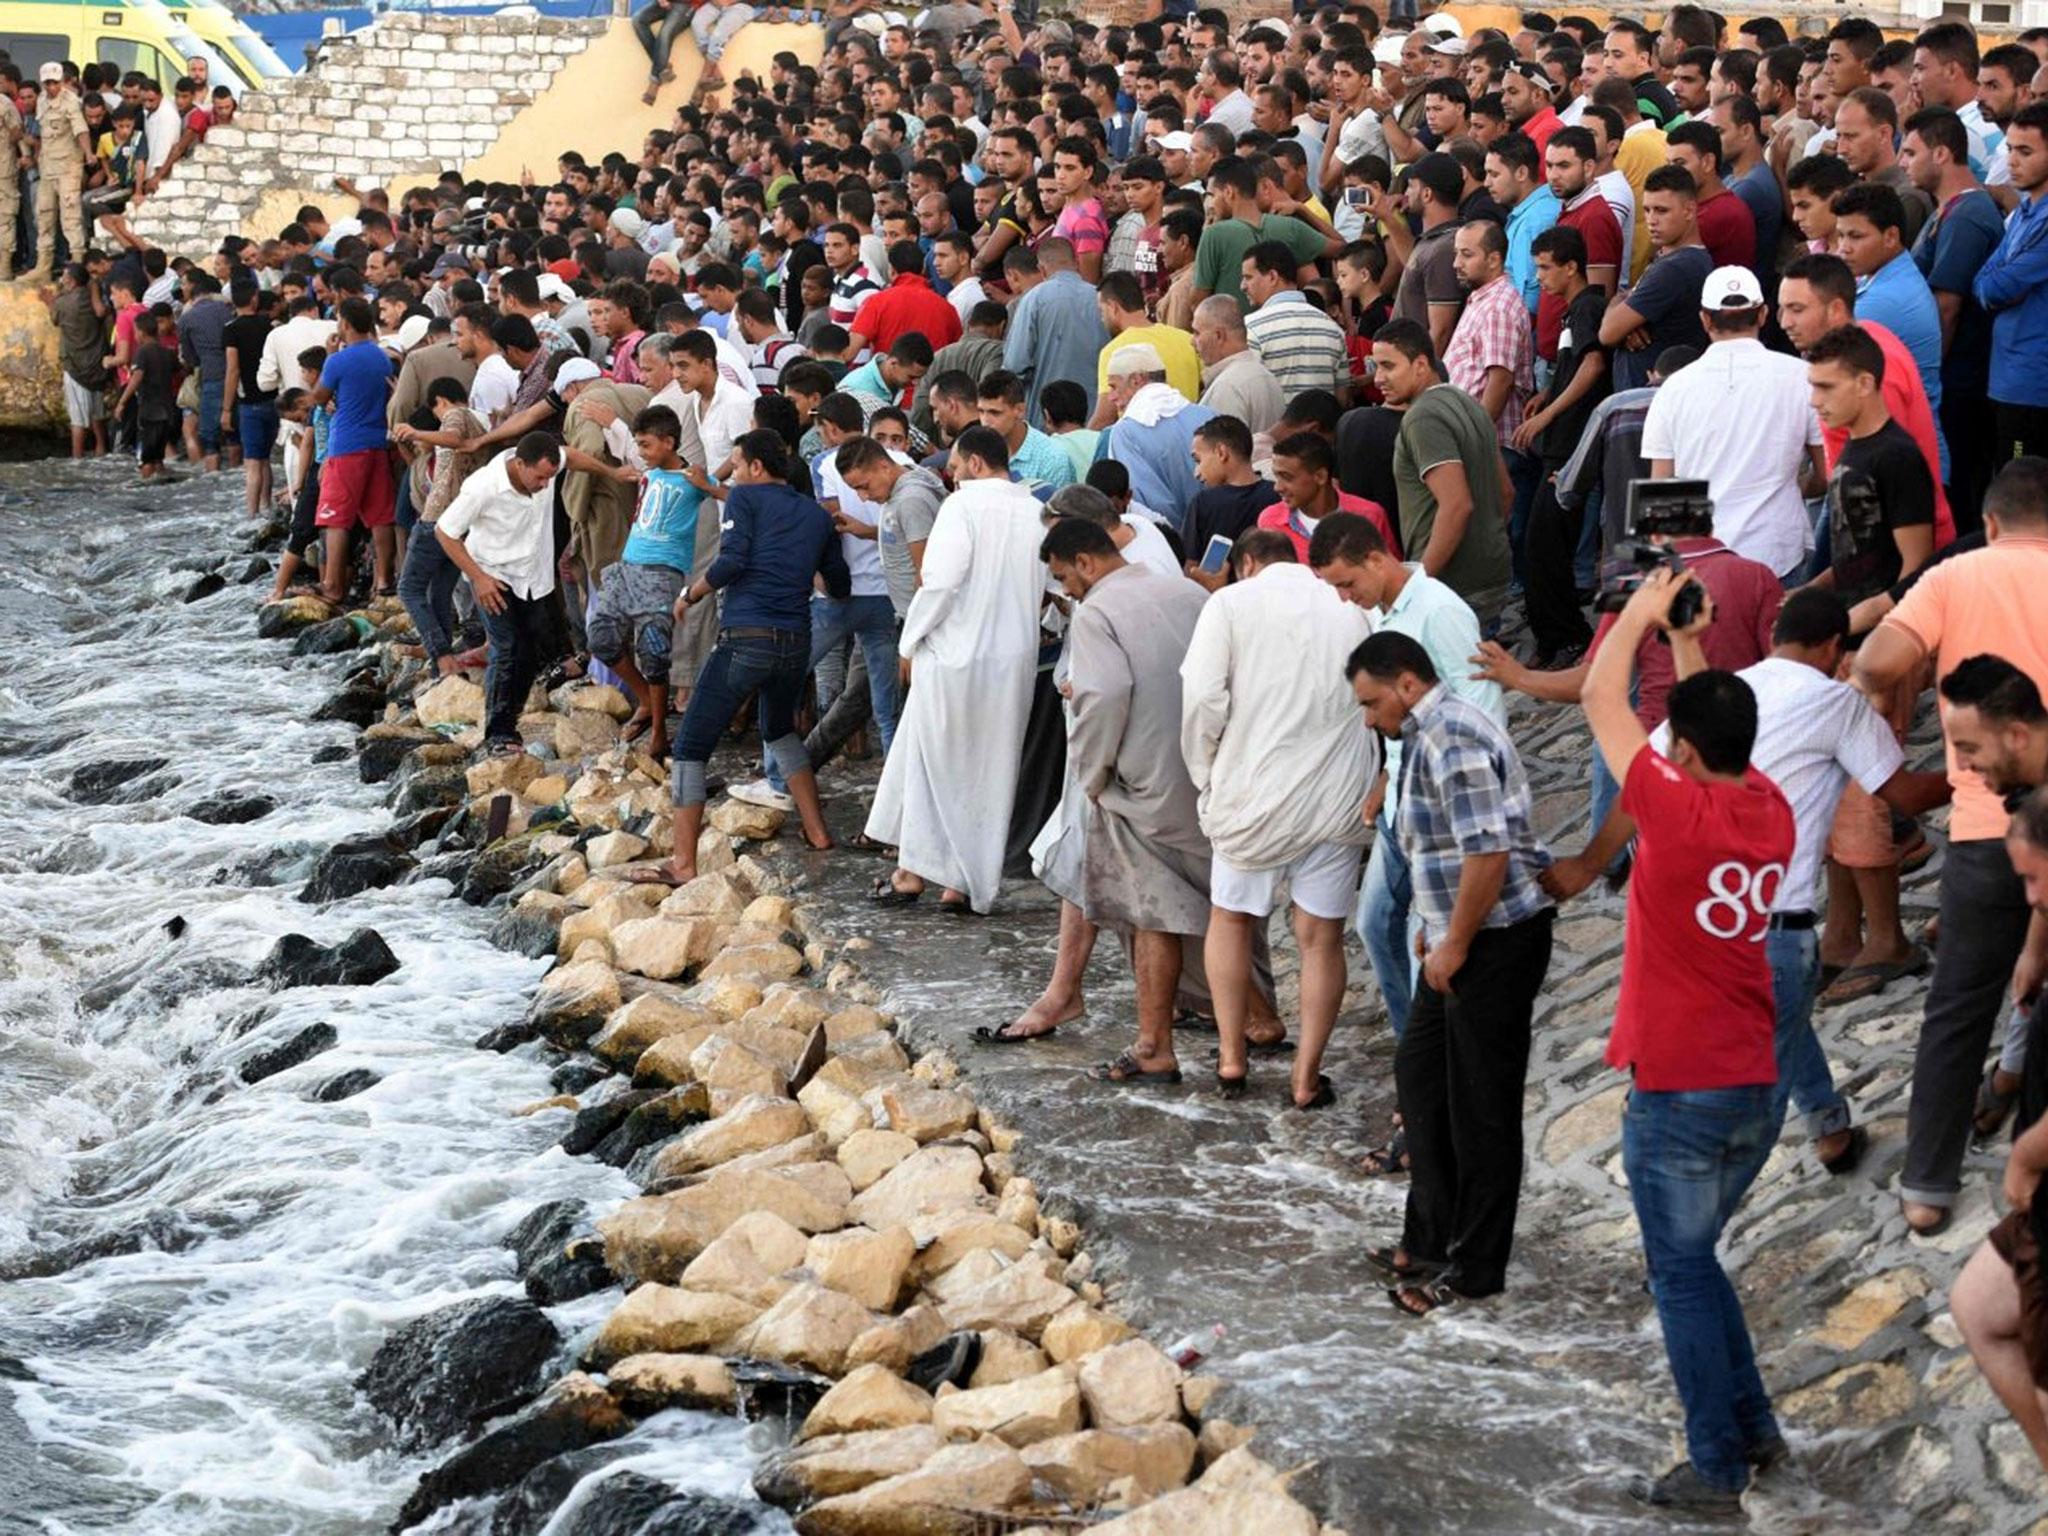 Egyptians stand on the shore as they wait for the recovery of bodies, during a search operation after a boat carrying migrants capsized in the Mediterranean, along the shore in the Egyptian port city of Rosetta on 22 September, 2016